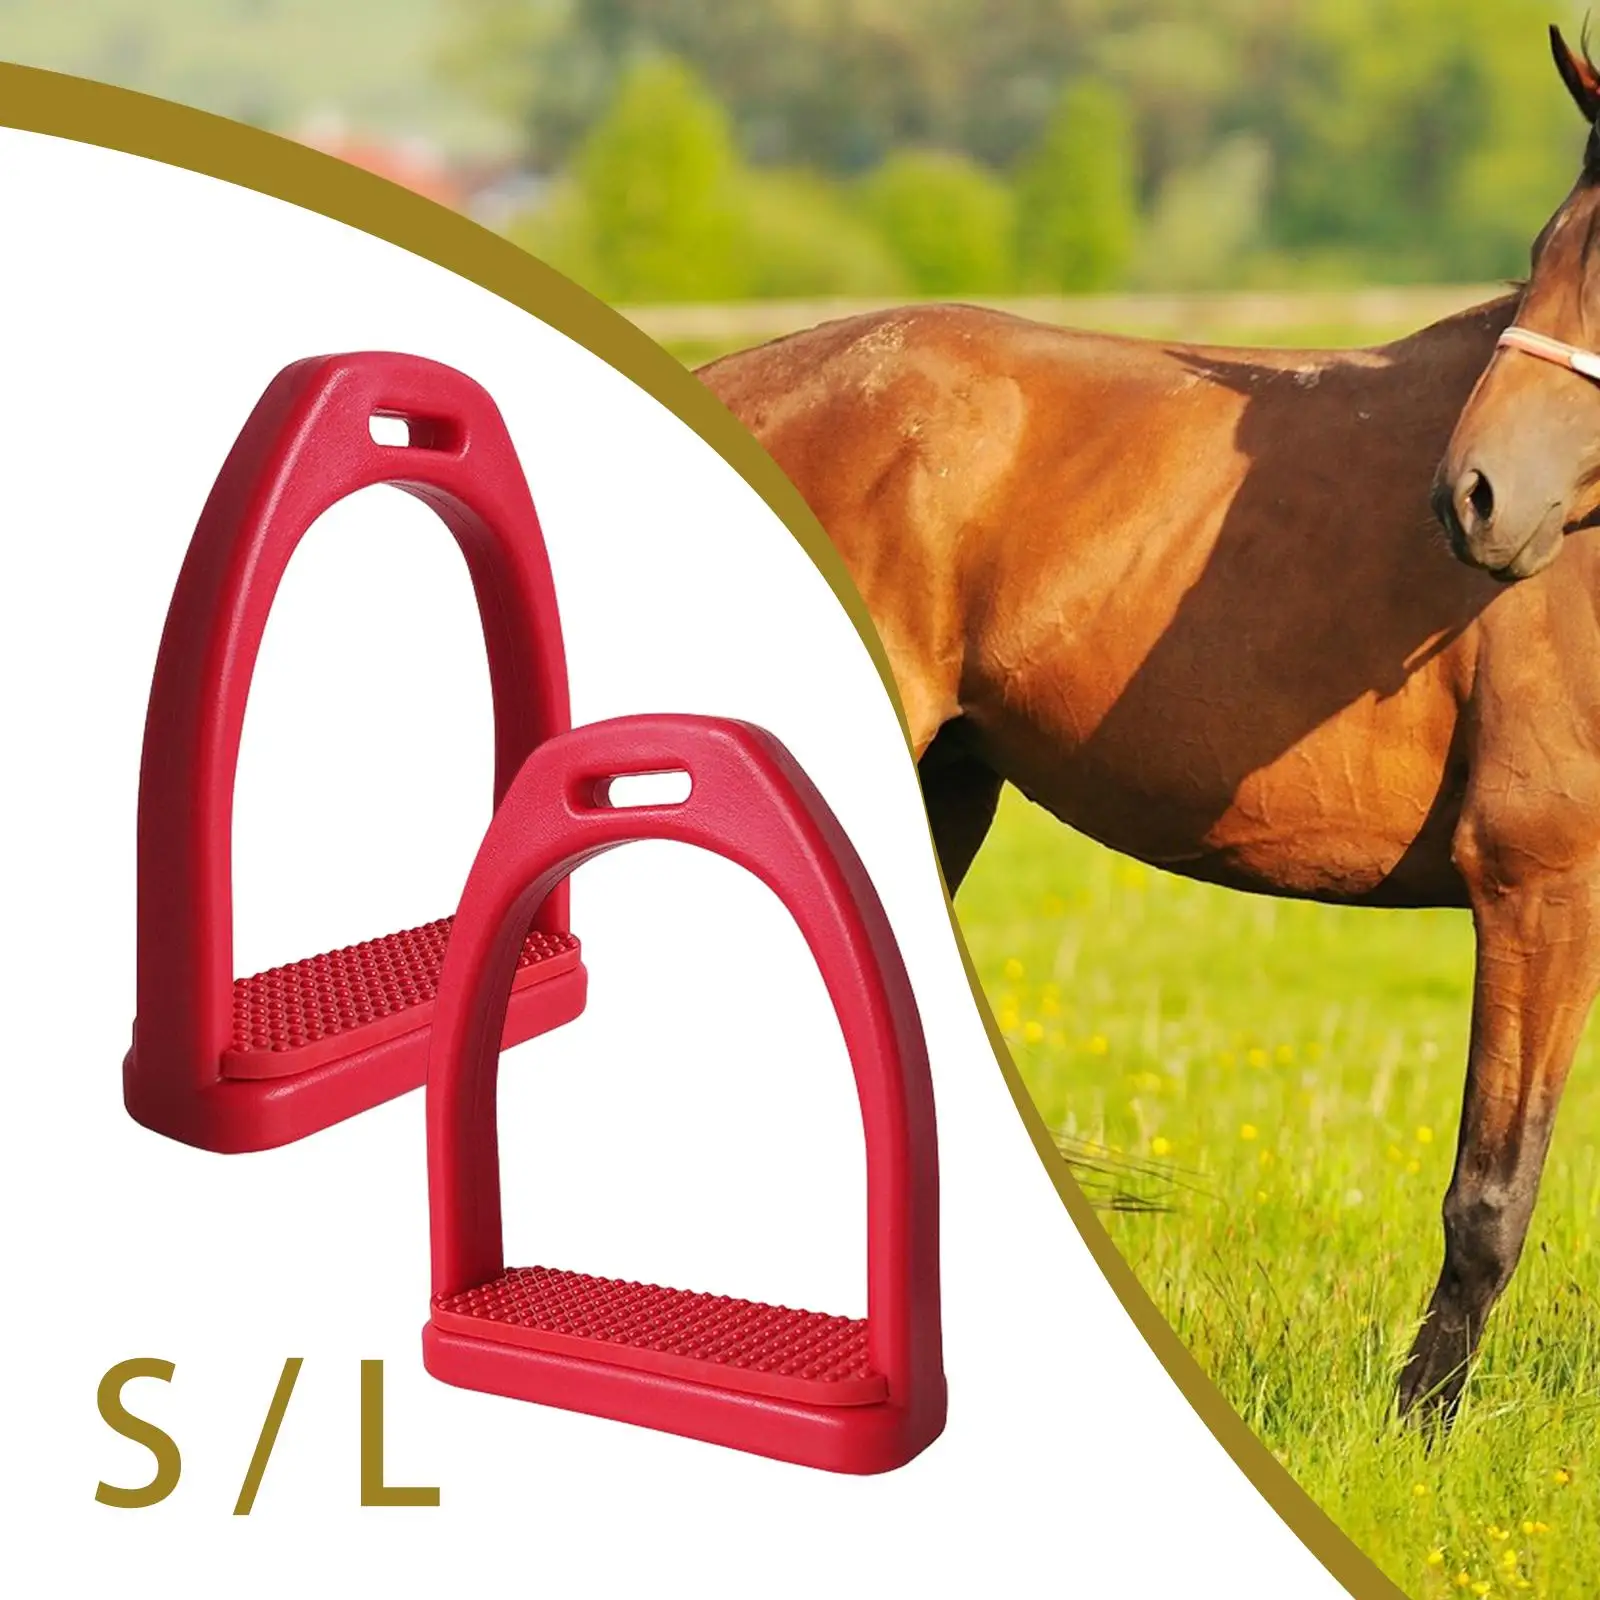 2Pcs Horse Riding Stirrups Equestrian Sports Rubber Pad Lightweight Tool for Safety Horse Riding Outdoor Supplies Adults Kids